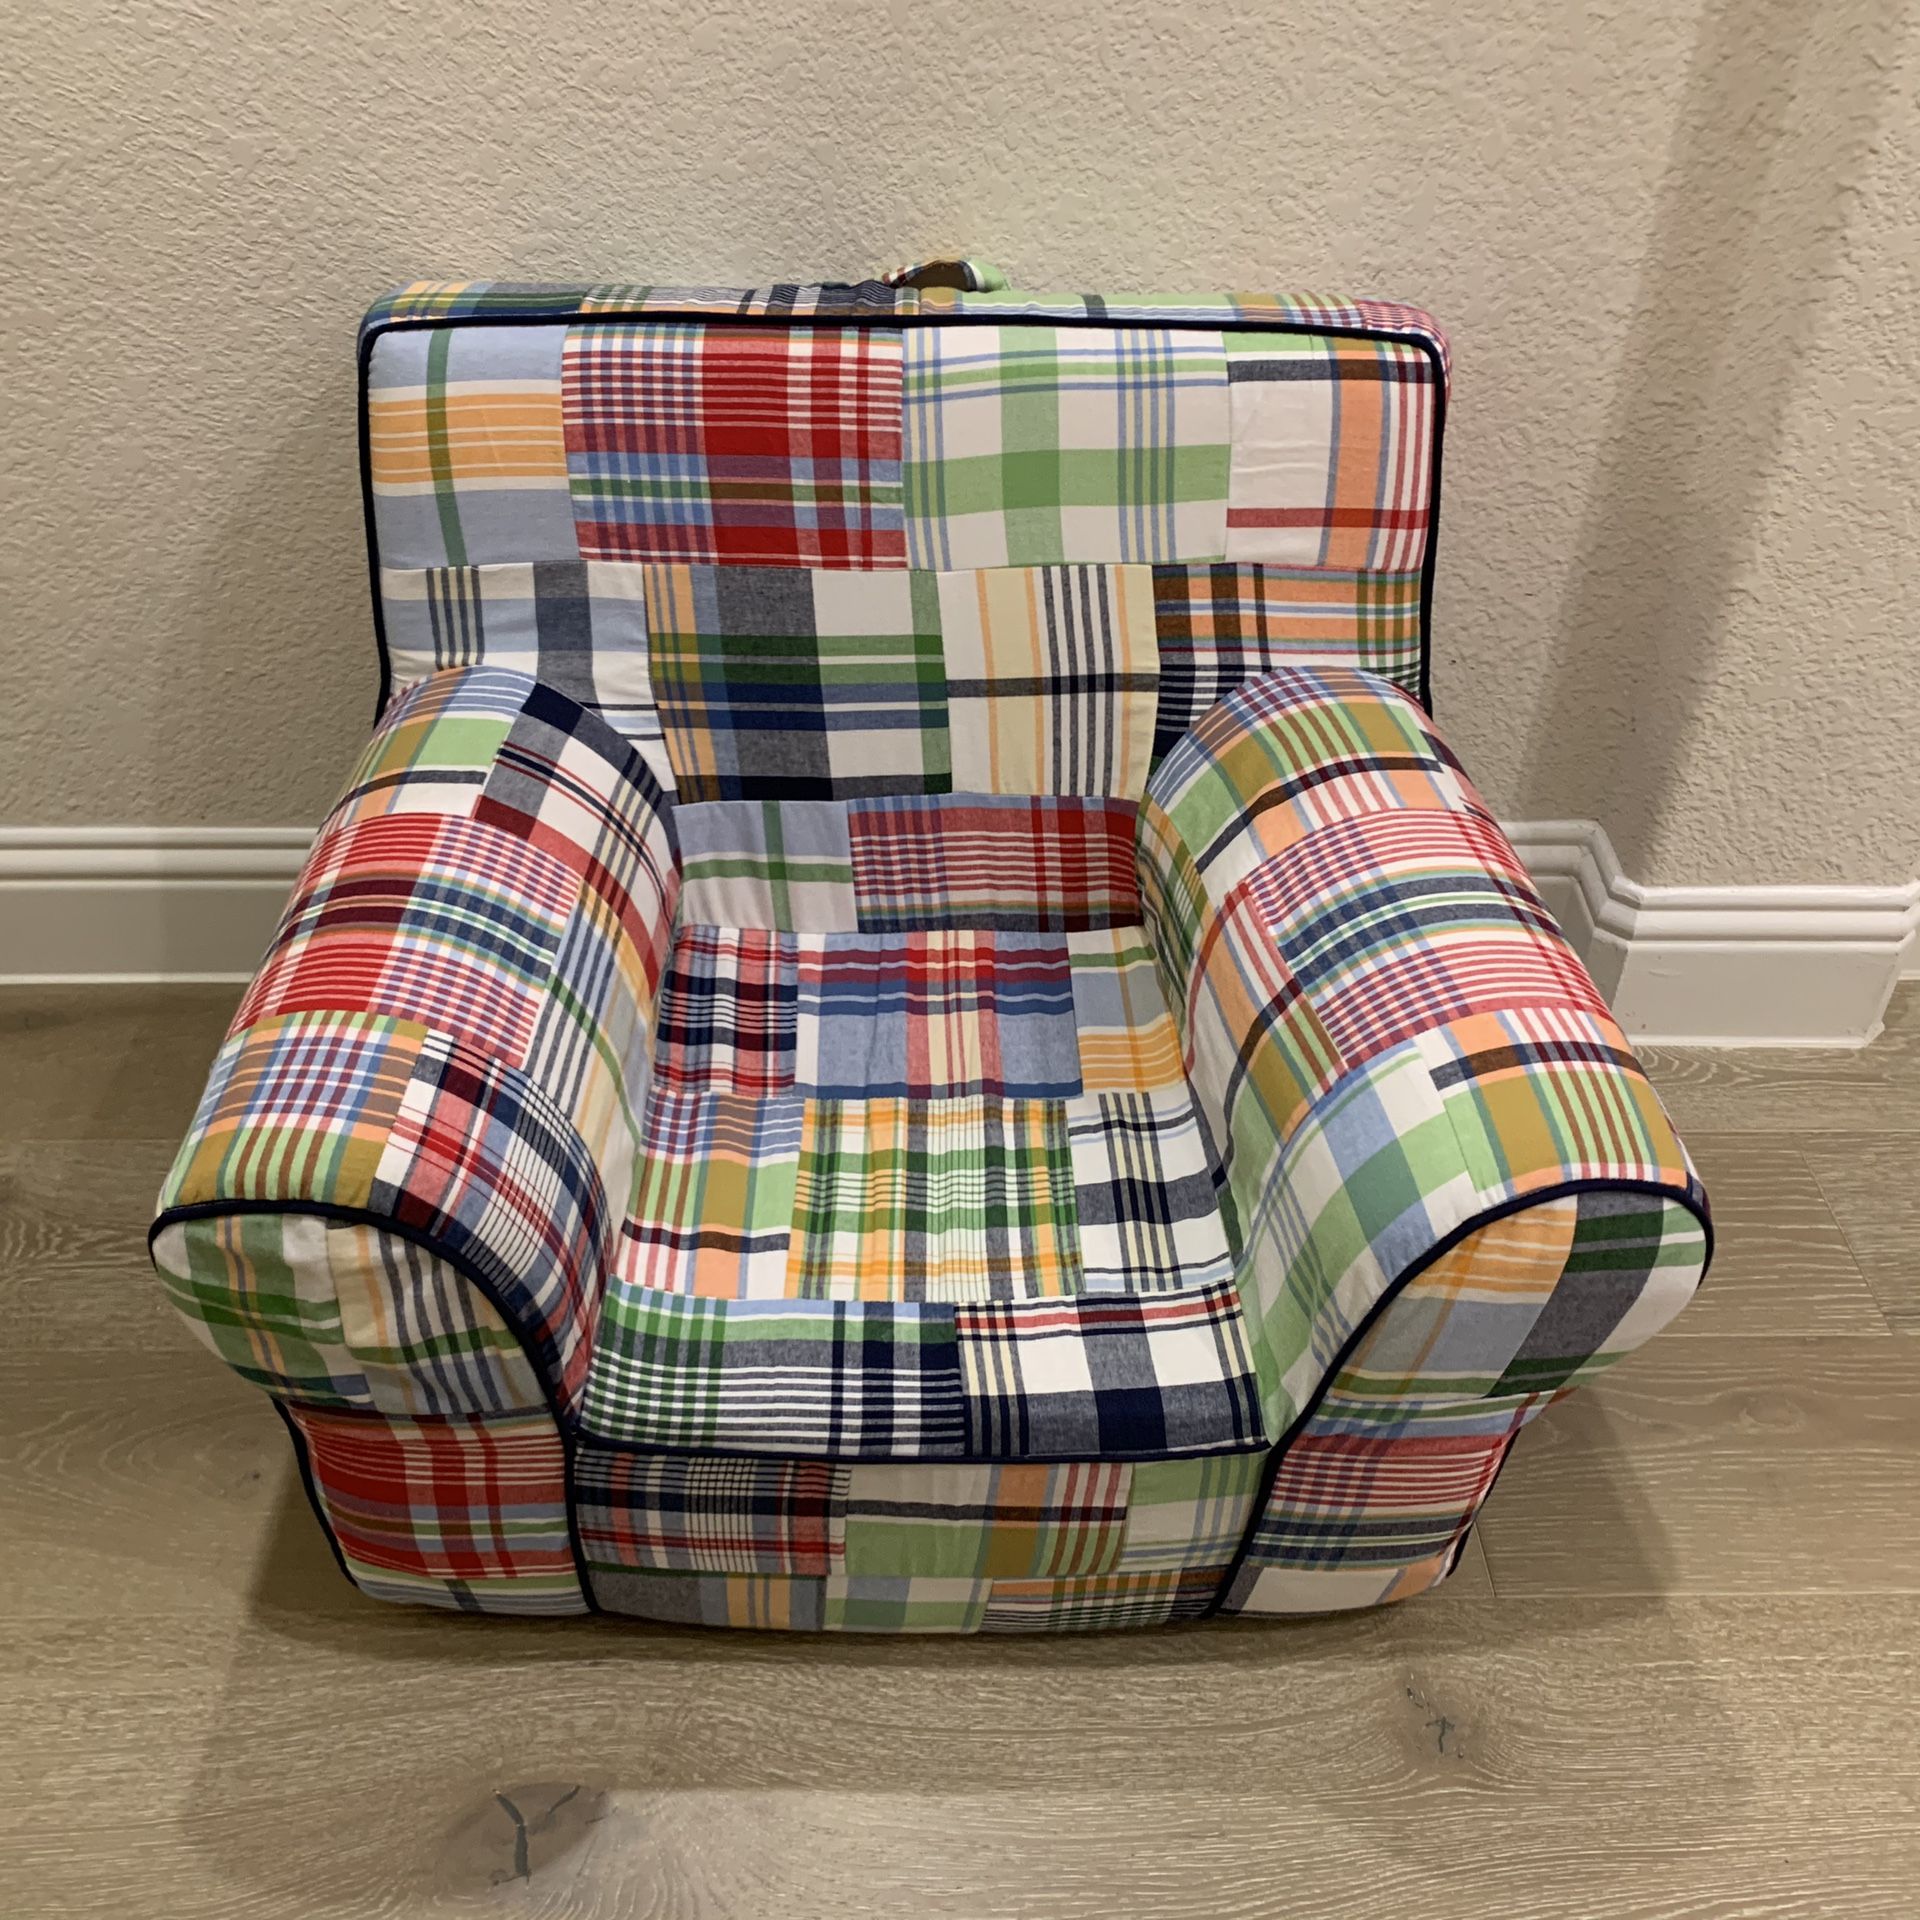 Pottery Barn Kids Anywhere Chair - MultiColor